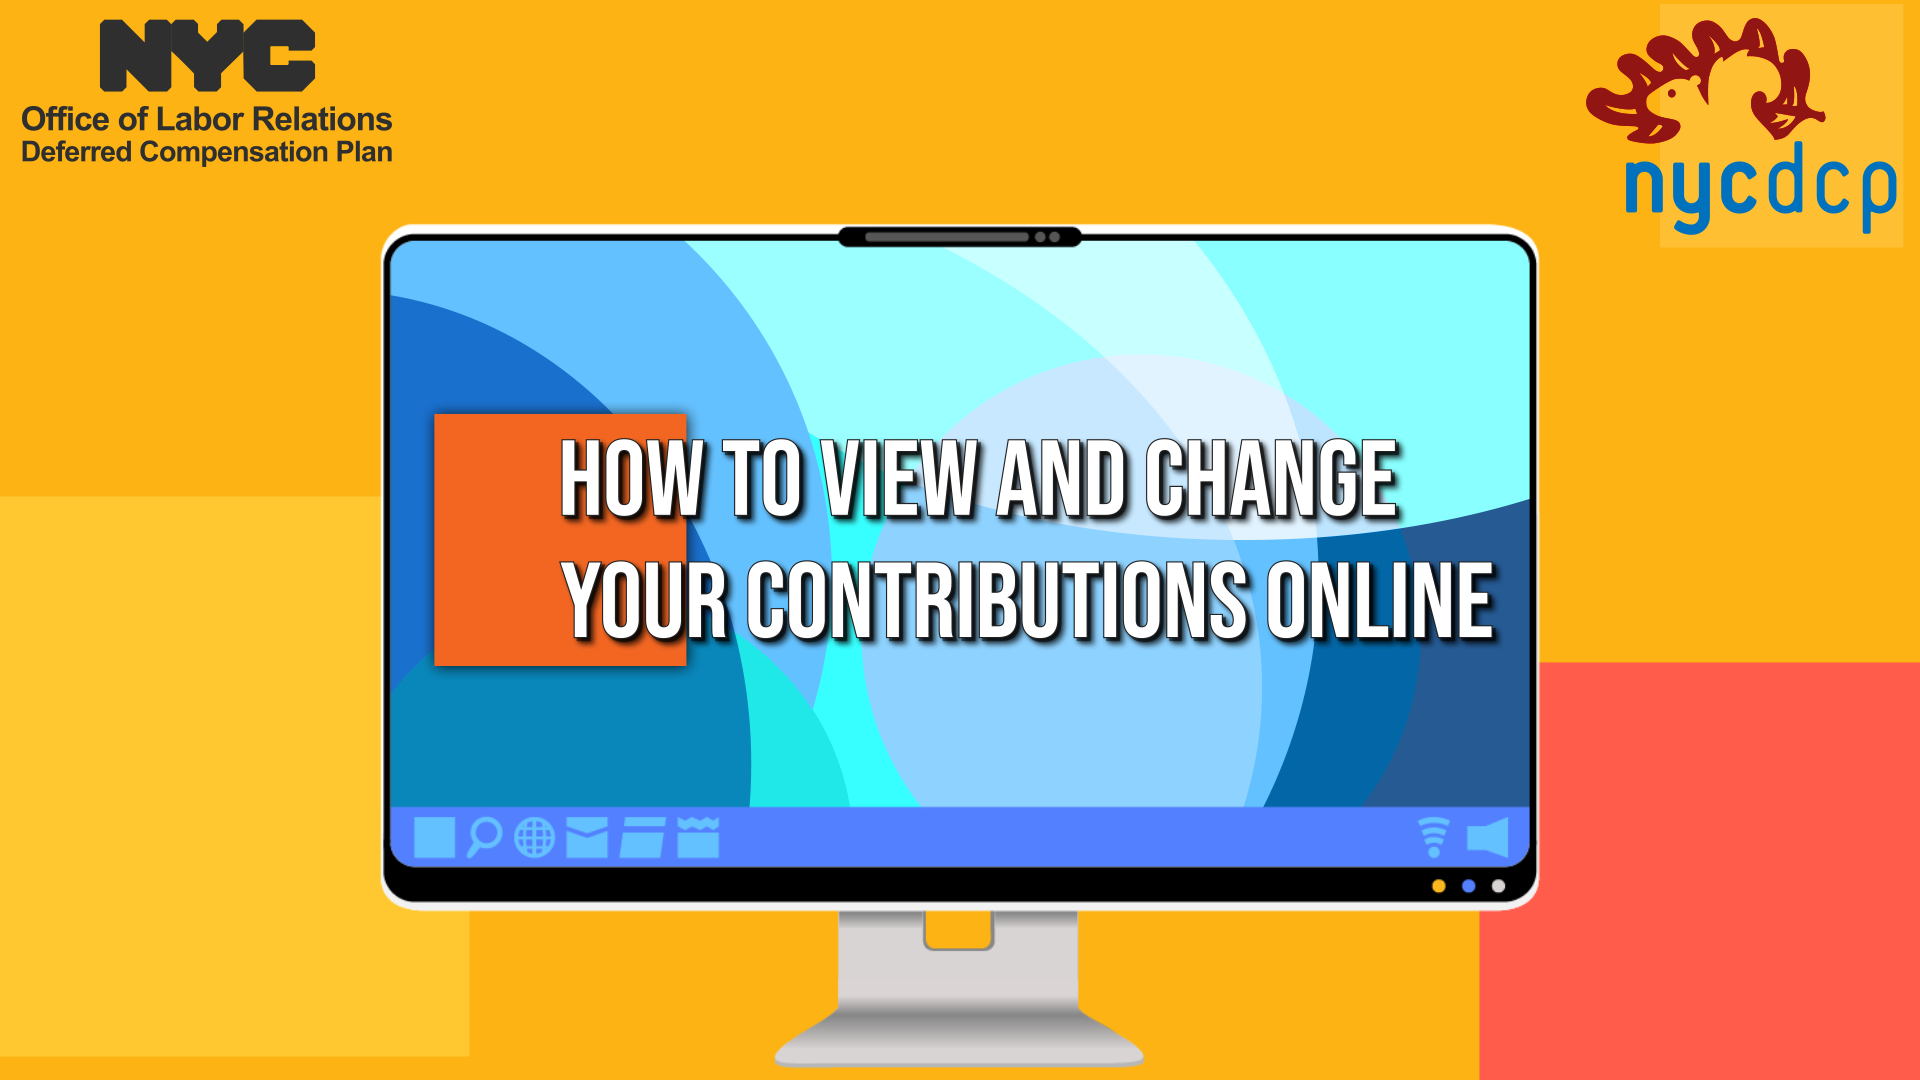 Watch the "How to View and/or Change Contributions Online" video